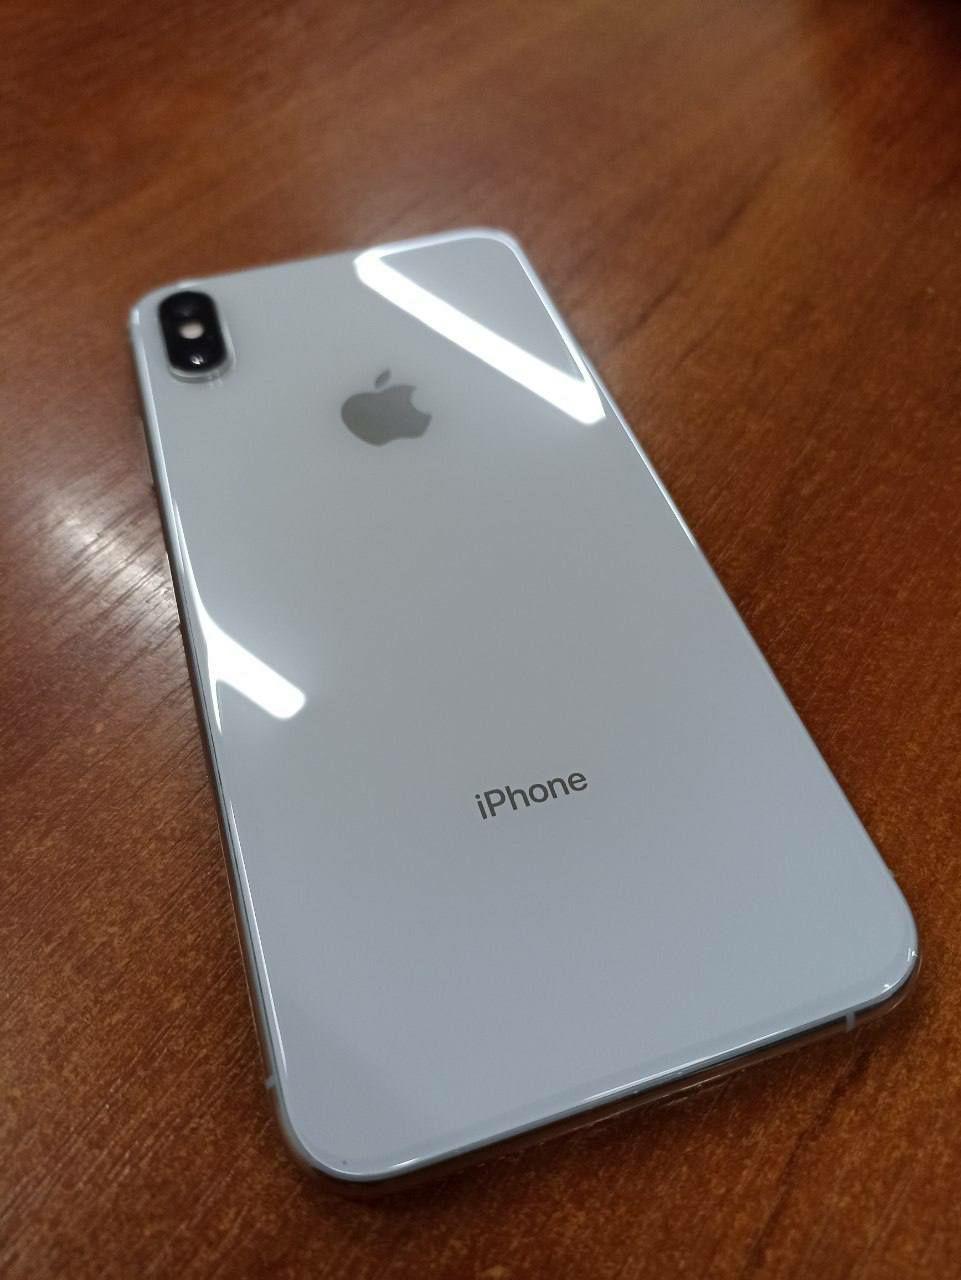 Iphone Xs Max idial !